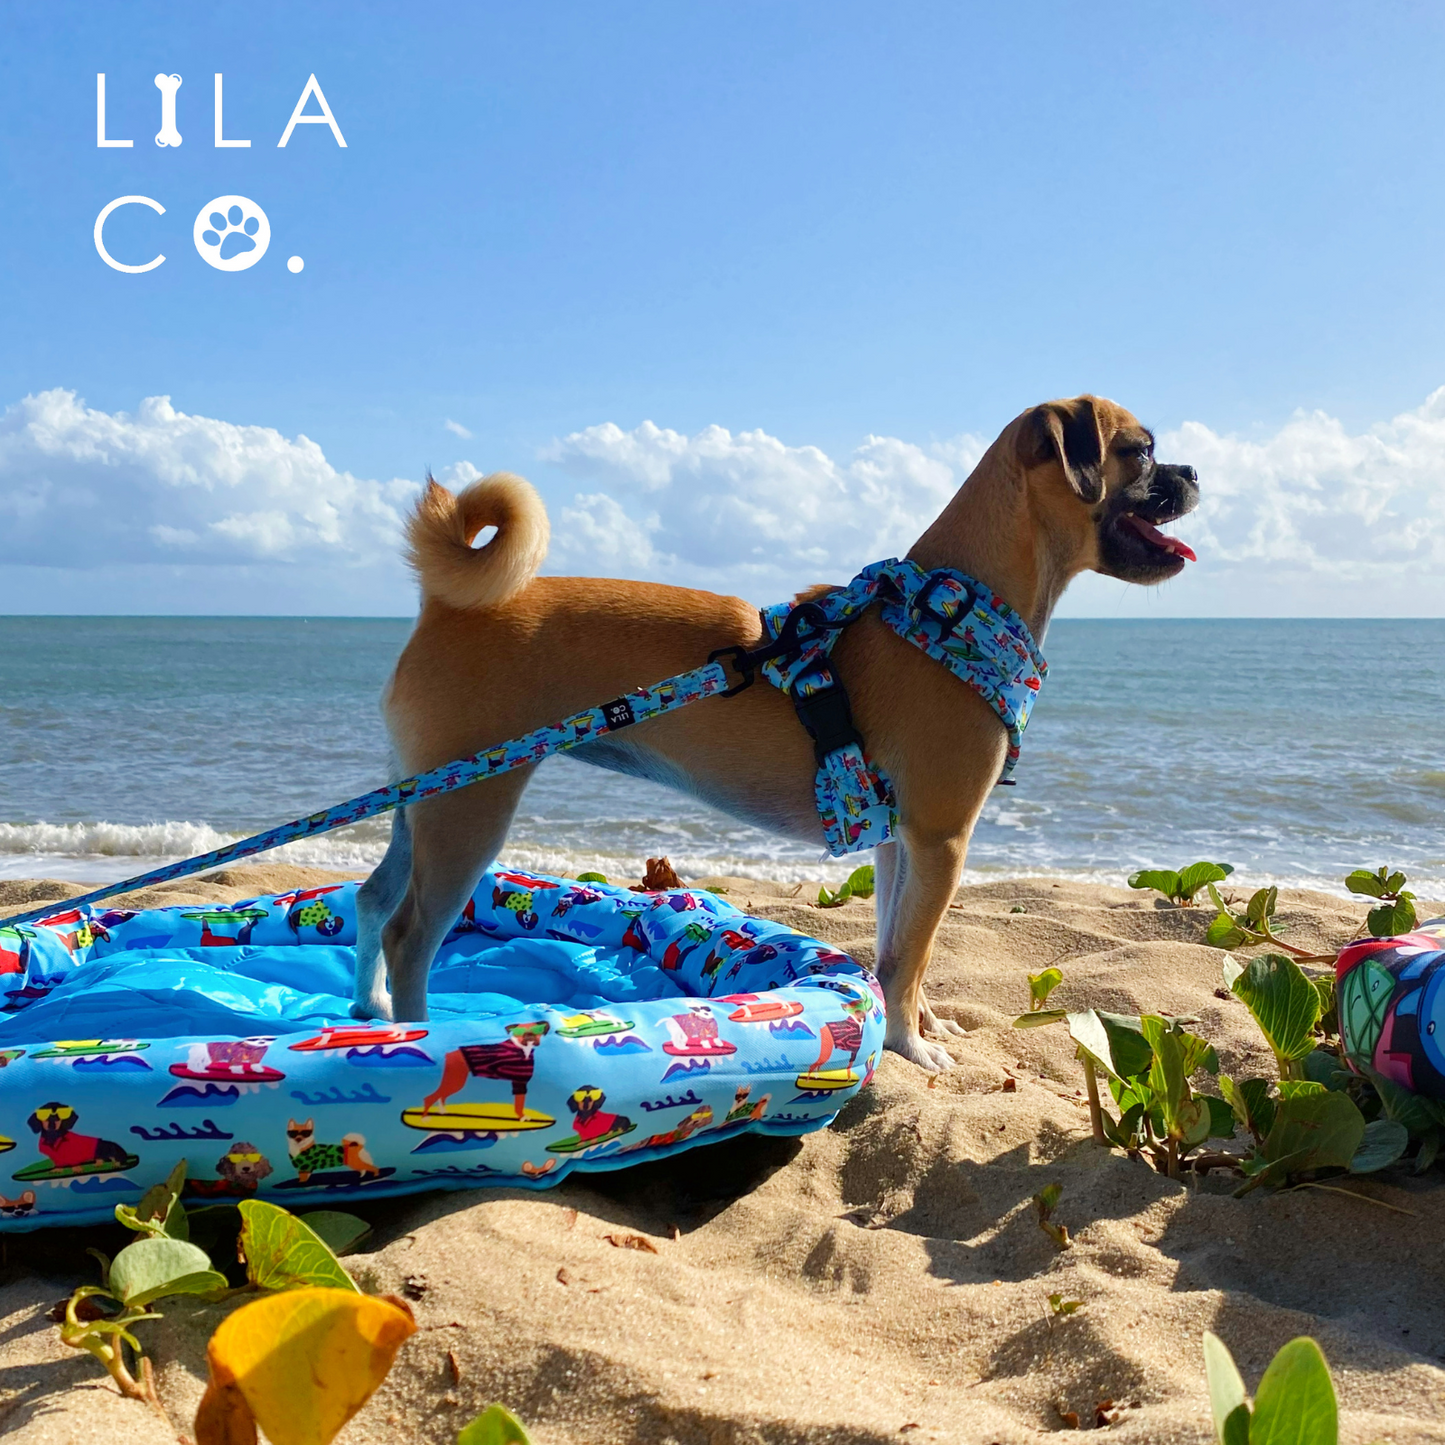 Pug Puppy on the beach in Lila Co Surf Dogs Print Adjustable Dog Harness, Dog Leash and Cooling Dog Bed